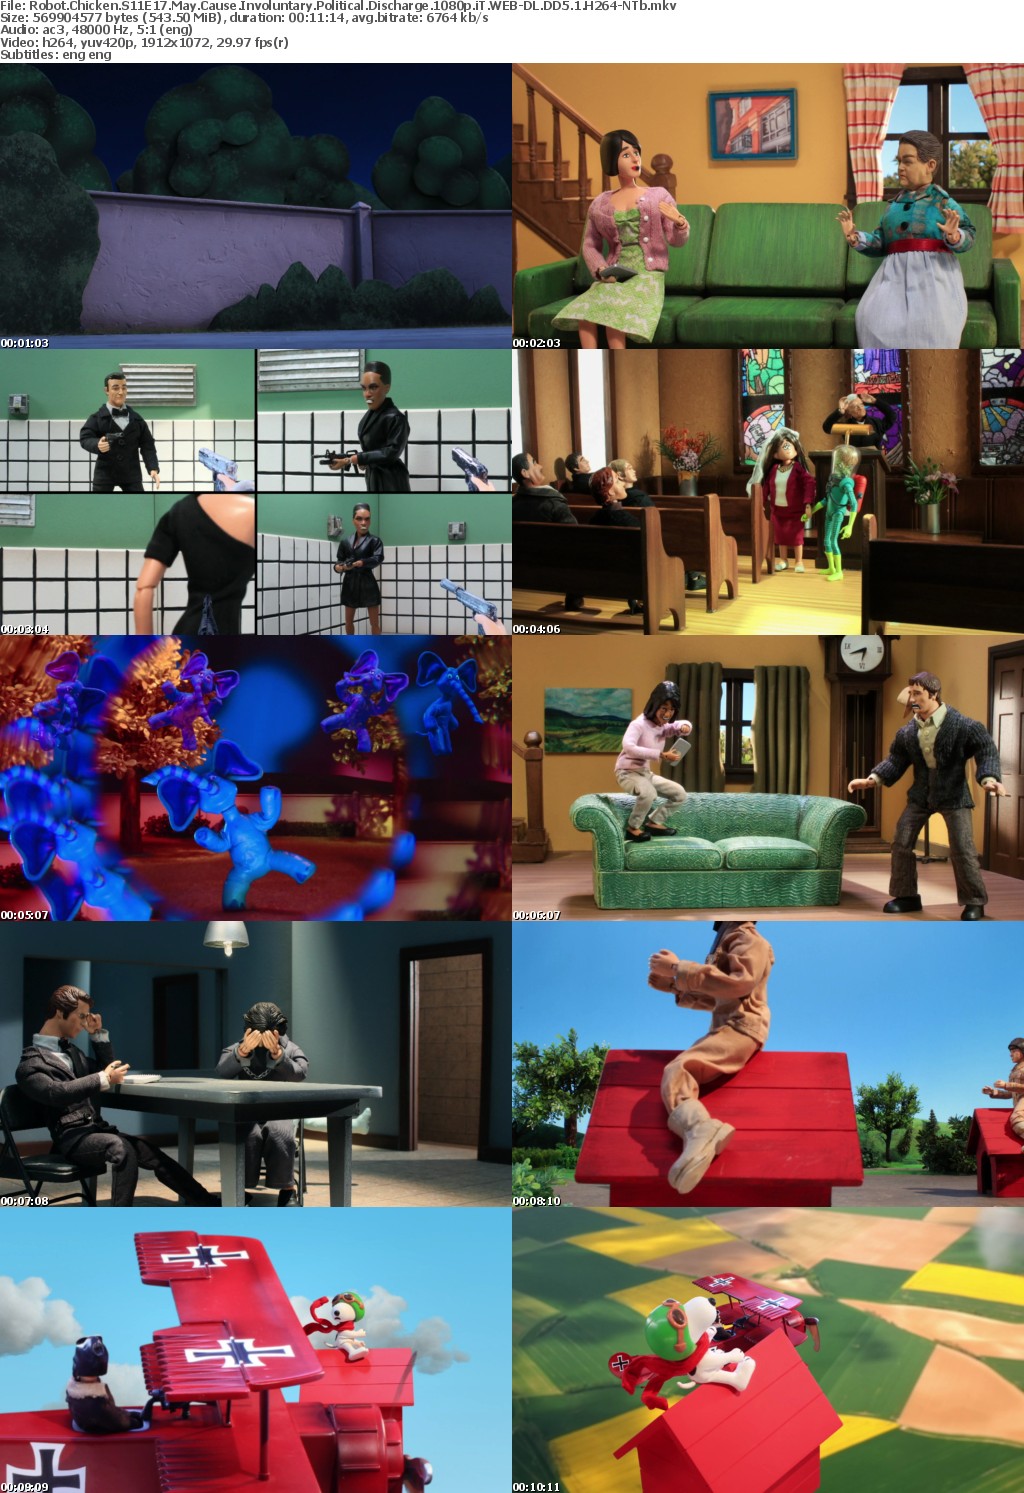 Robot Chicken S11E17 May Cause Involuntary Political Discharge 1080p WEB-DL DD5 1 H264-NTb